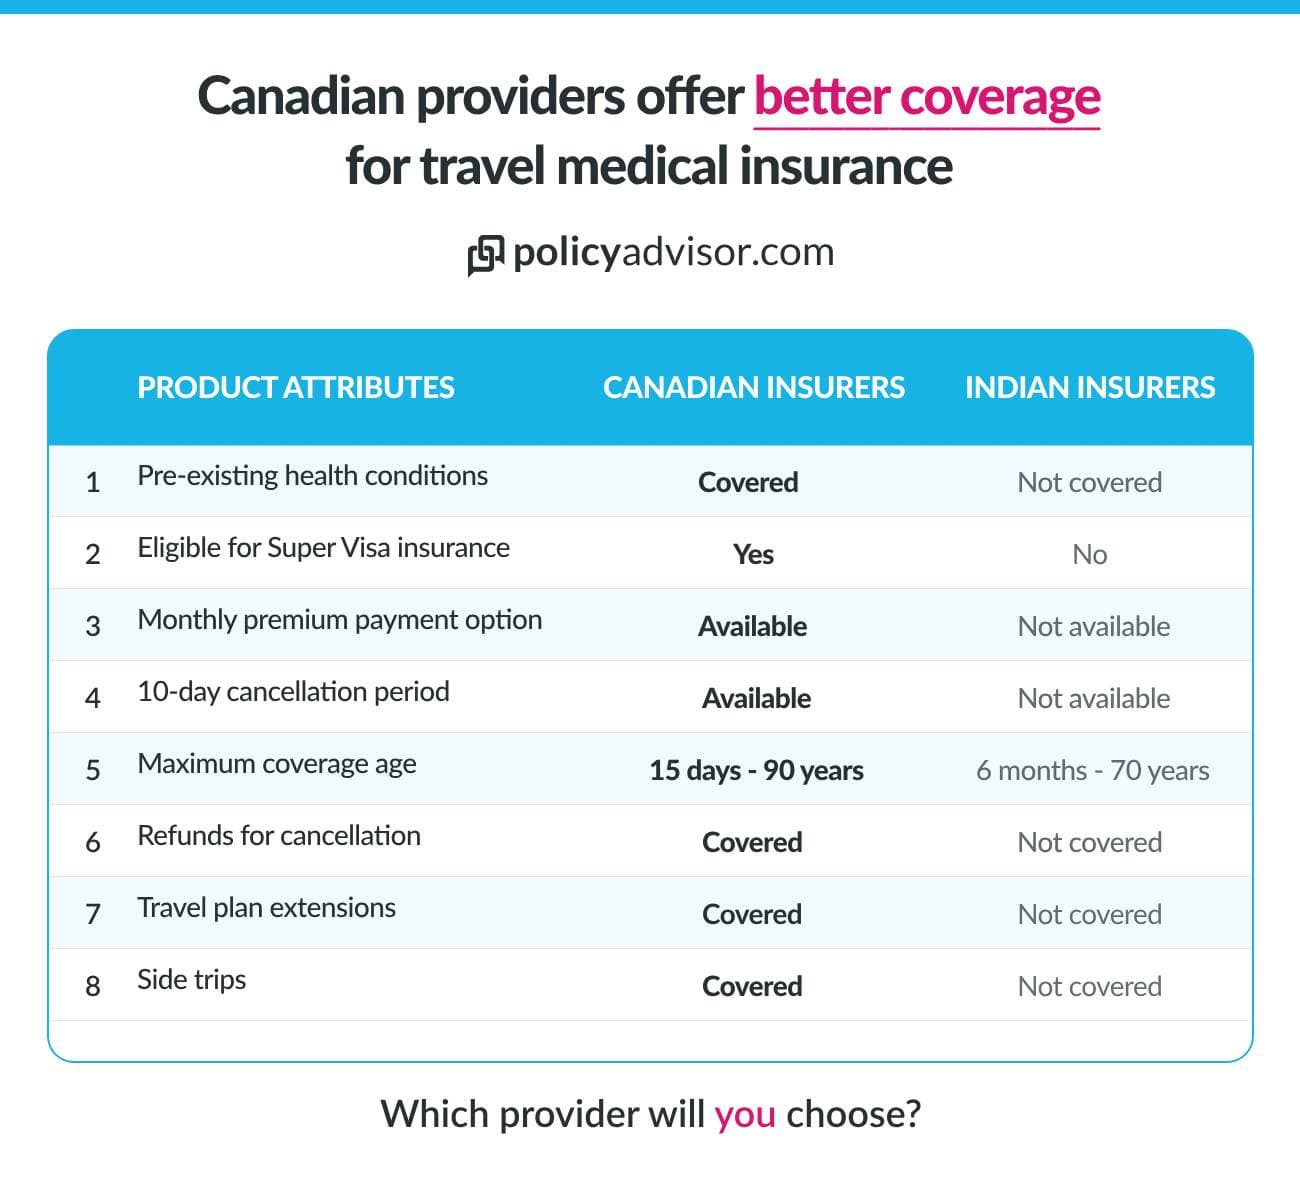 Canadian travel insurance providers offer better coverage than Indian insurance providers do.